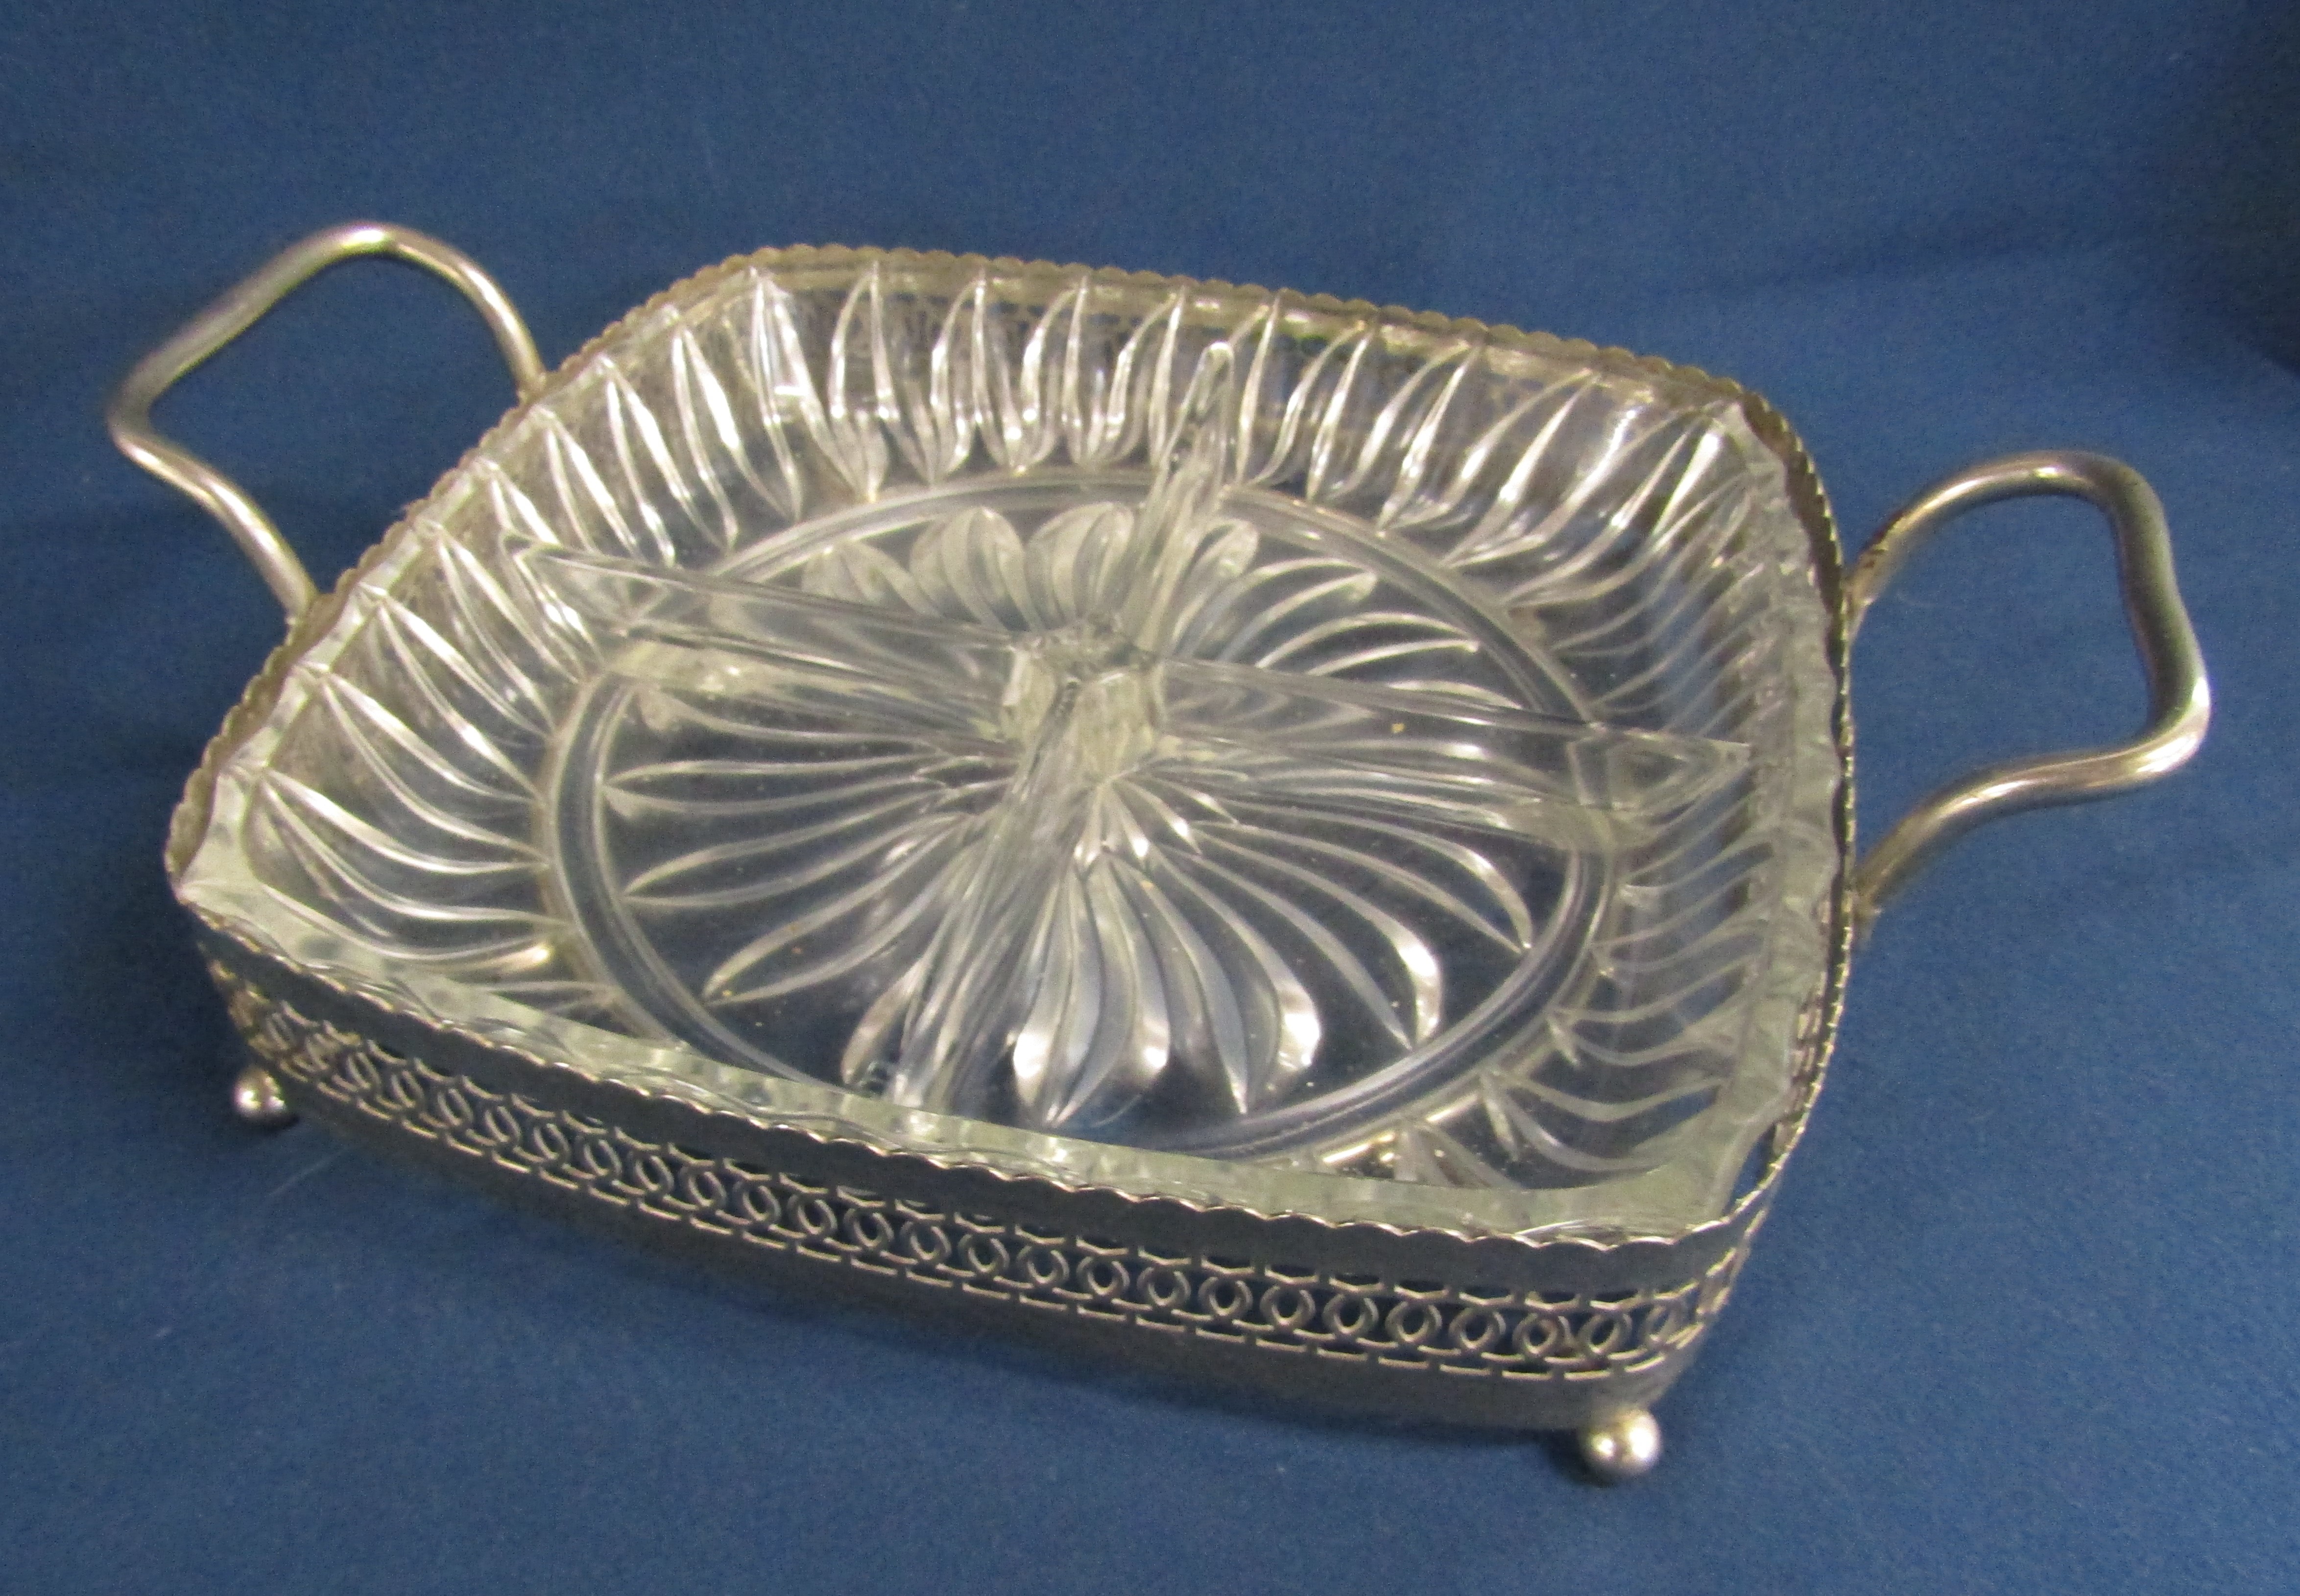 Glassware includes mounted vases, hors-d'oeuvre tray, vases etc - Image 4 of 5